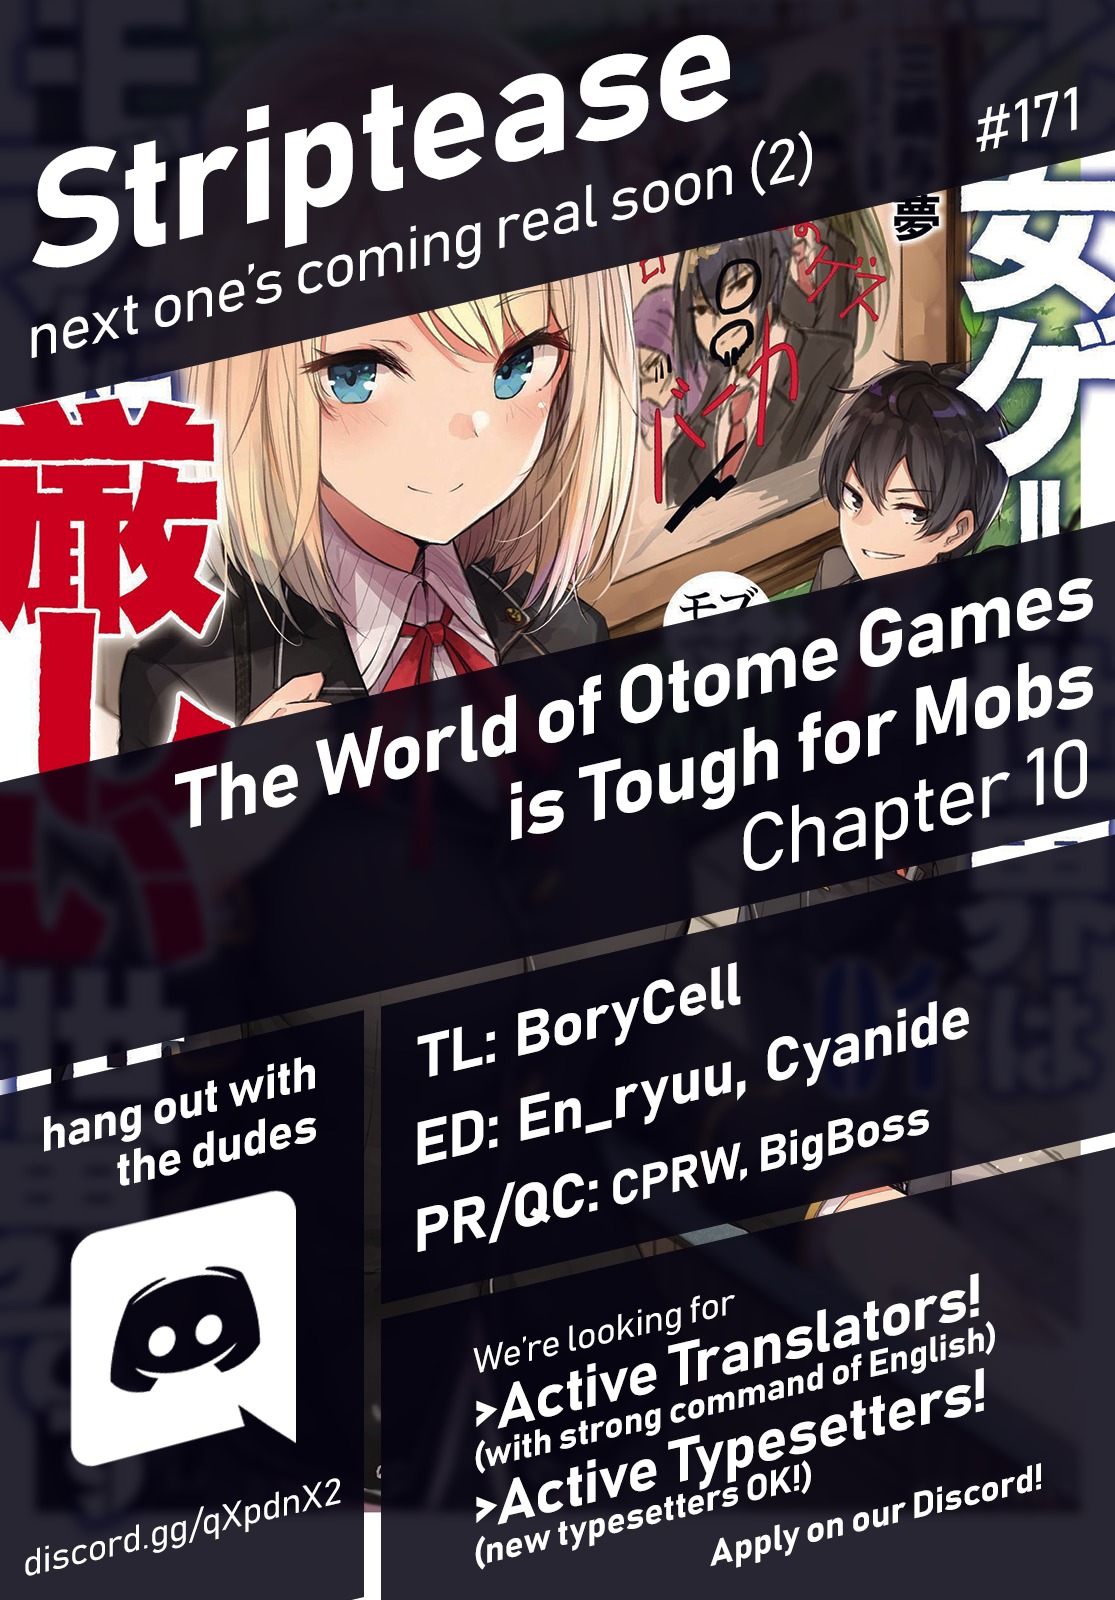 The World of Otome Games is Tough for Mobs vol.2 ch.10